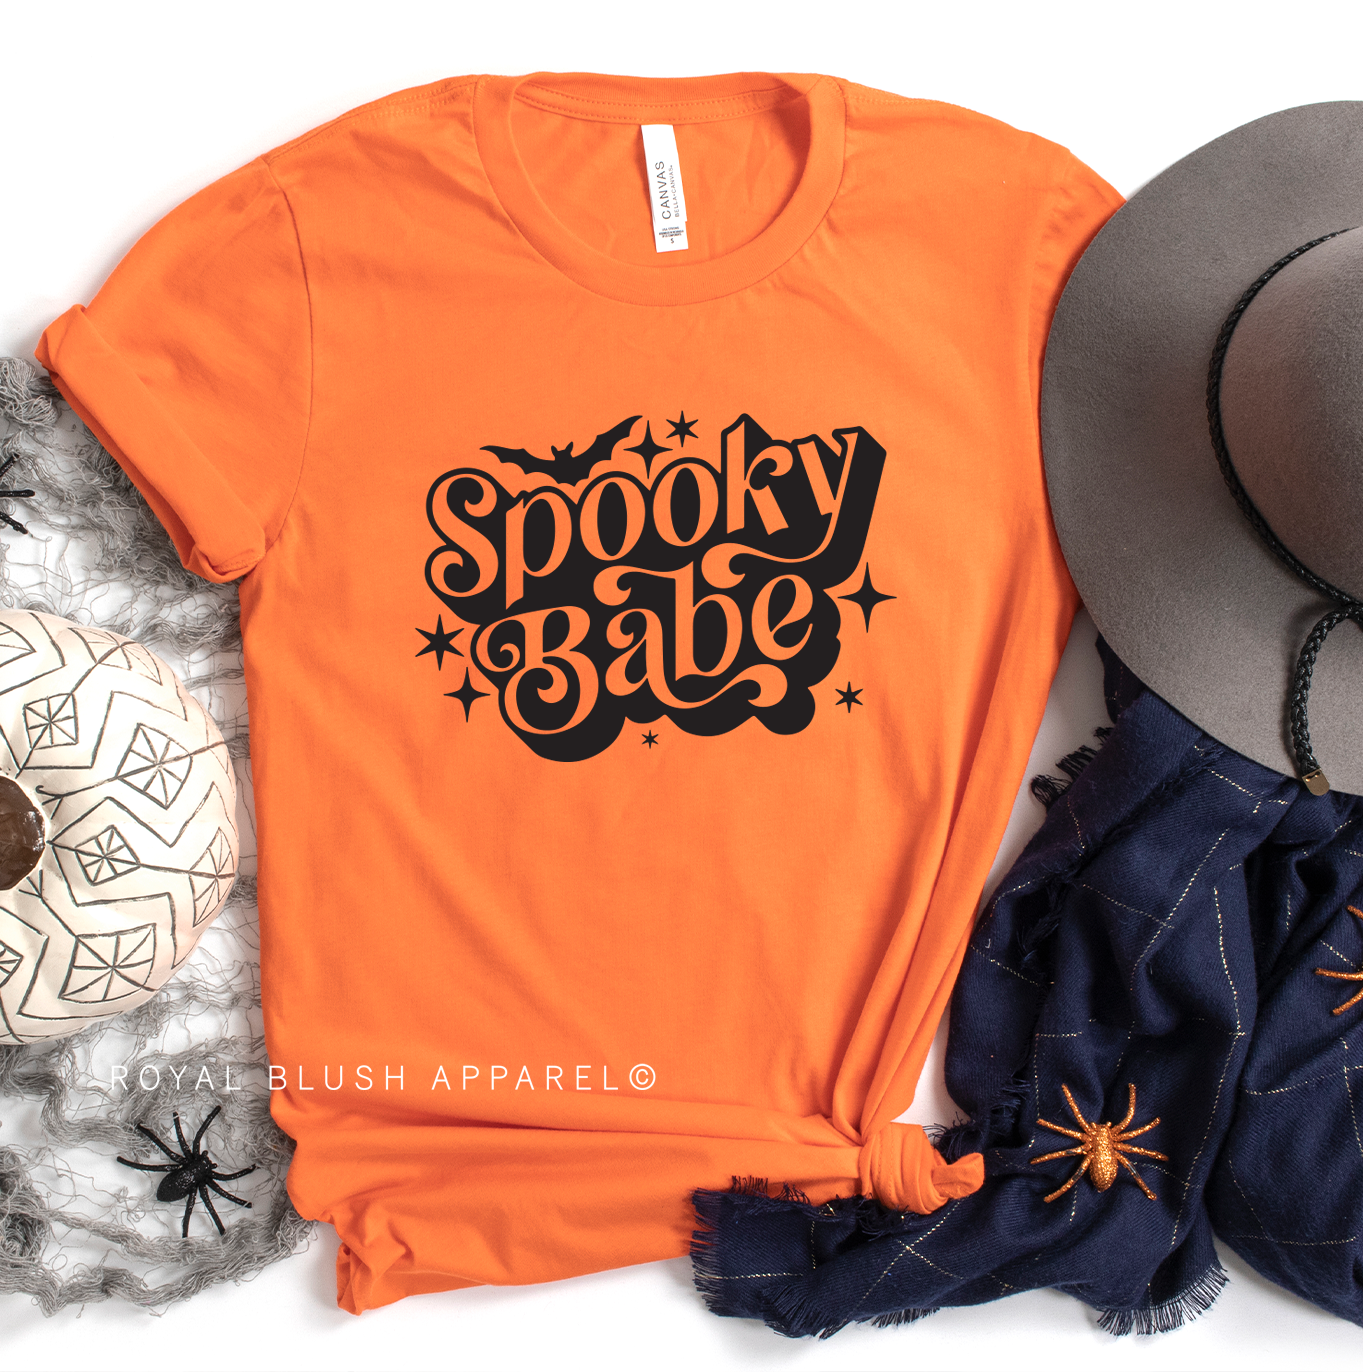 Spooky Babe Relaxed Unisex T-shirt